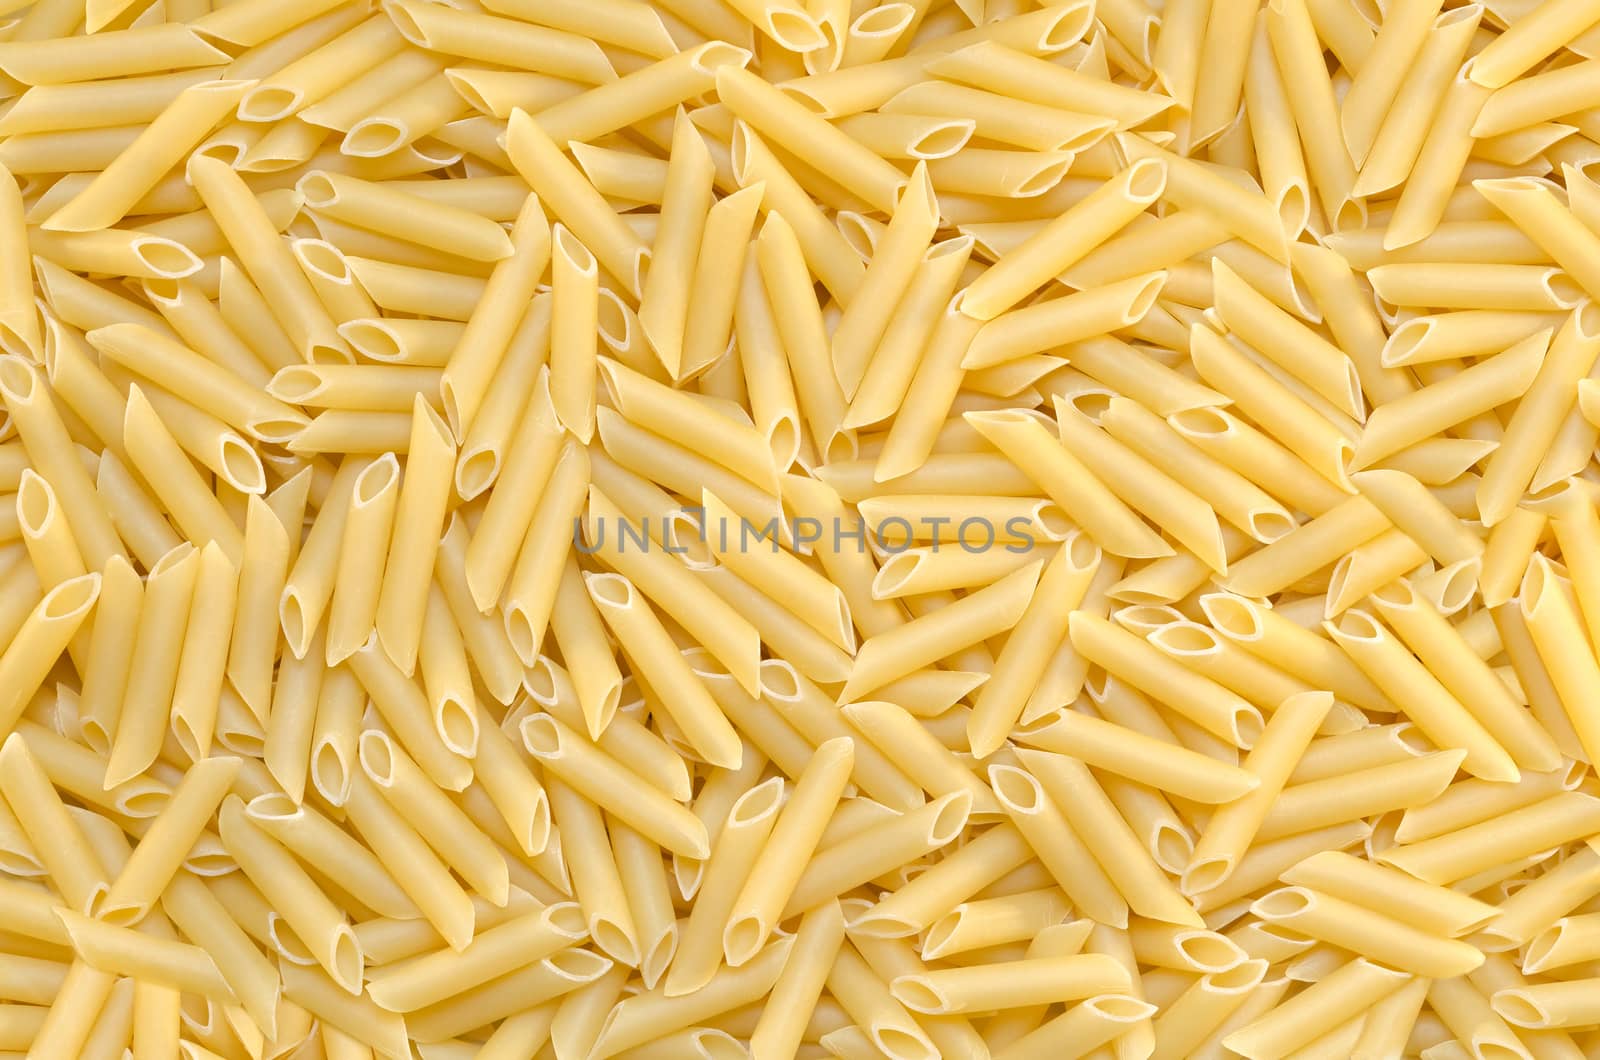 Background tubular pasta are on the surface, textured